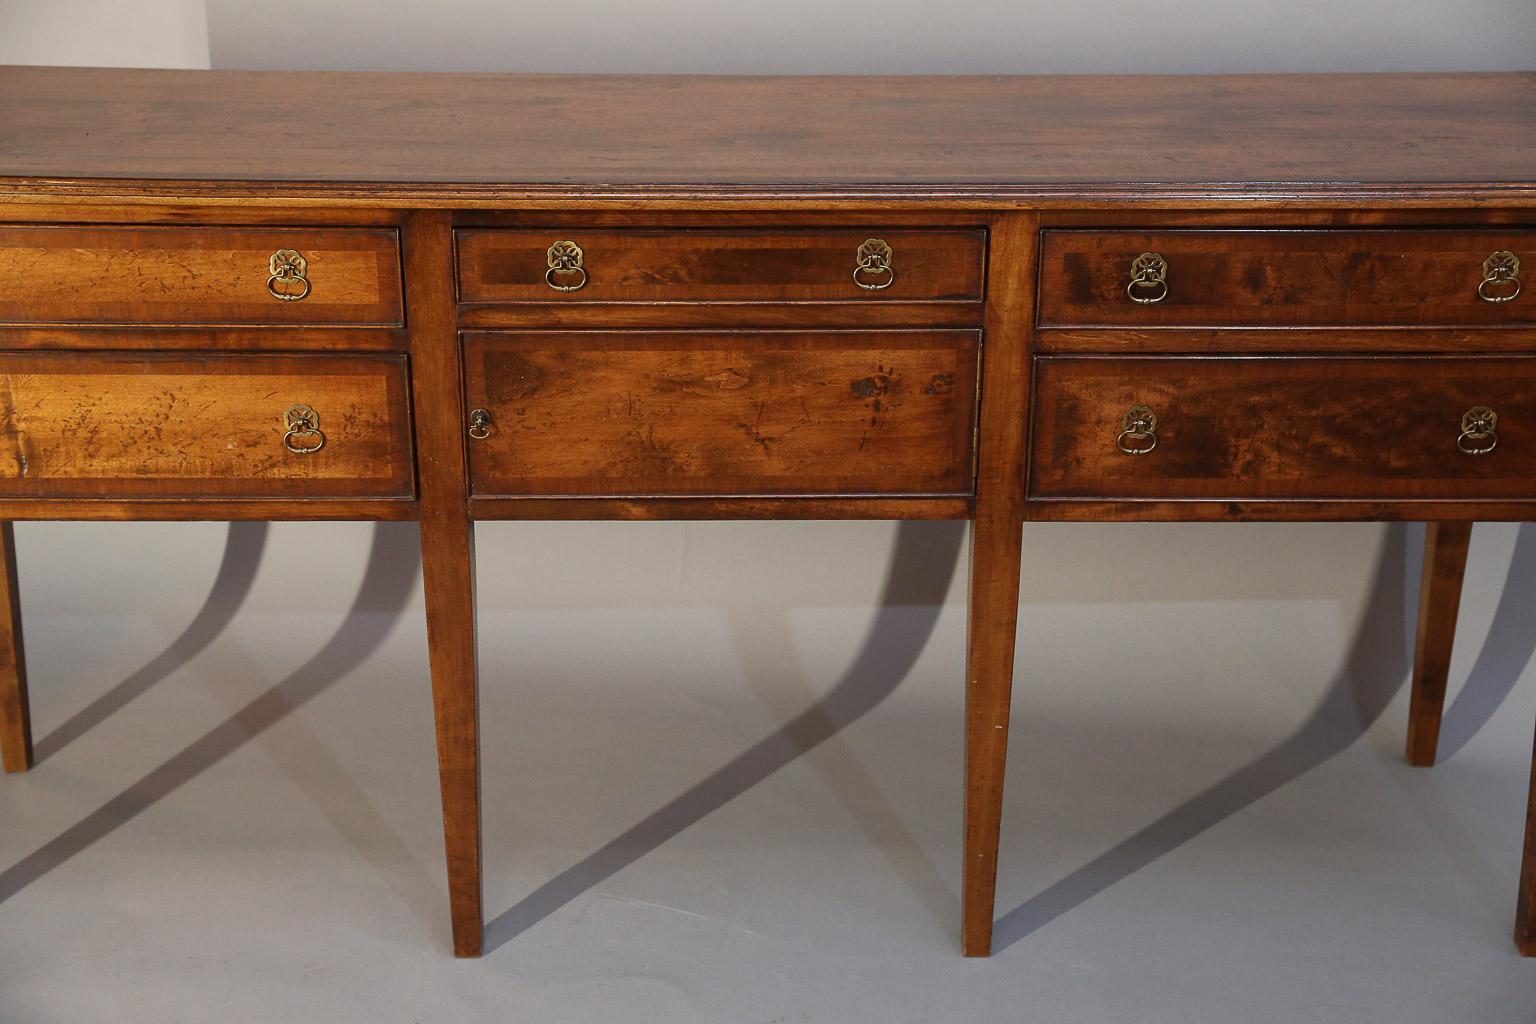 Fruitwood huntboard or sideboard has five drawers and one door, all banded in mahogany,
as well as the top.

Huntboard sits upon 6 square tapered legs, four in front and two in back.

This is a very handsome piece.
 